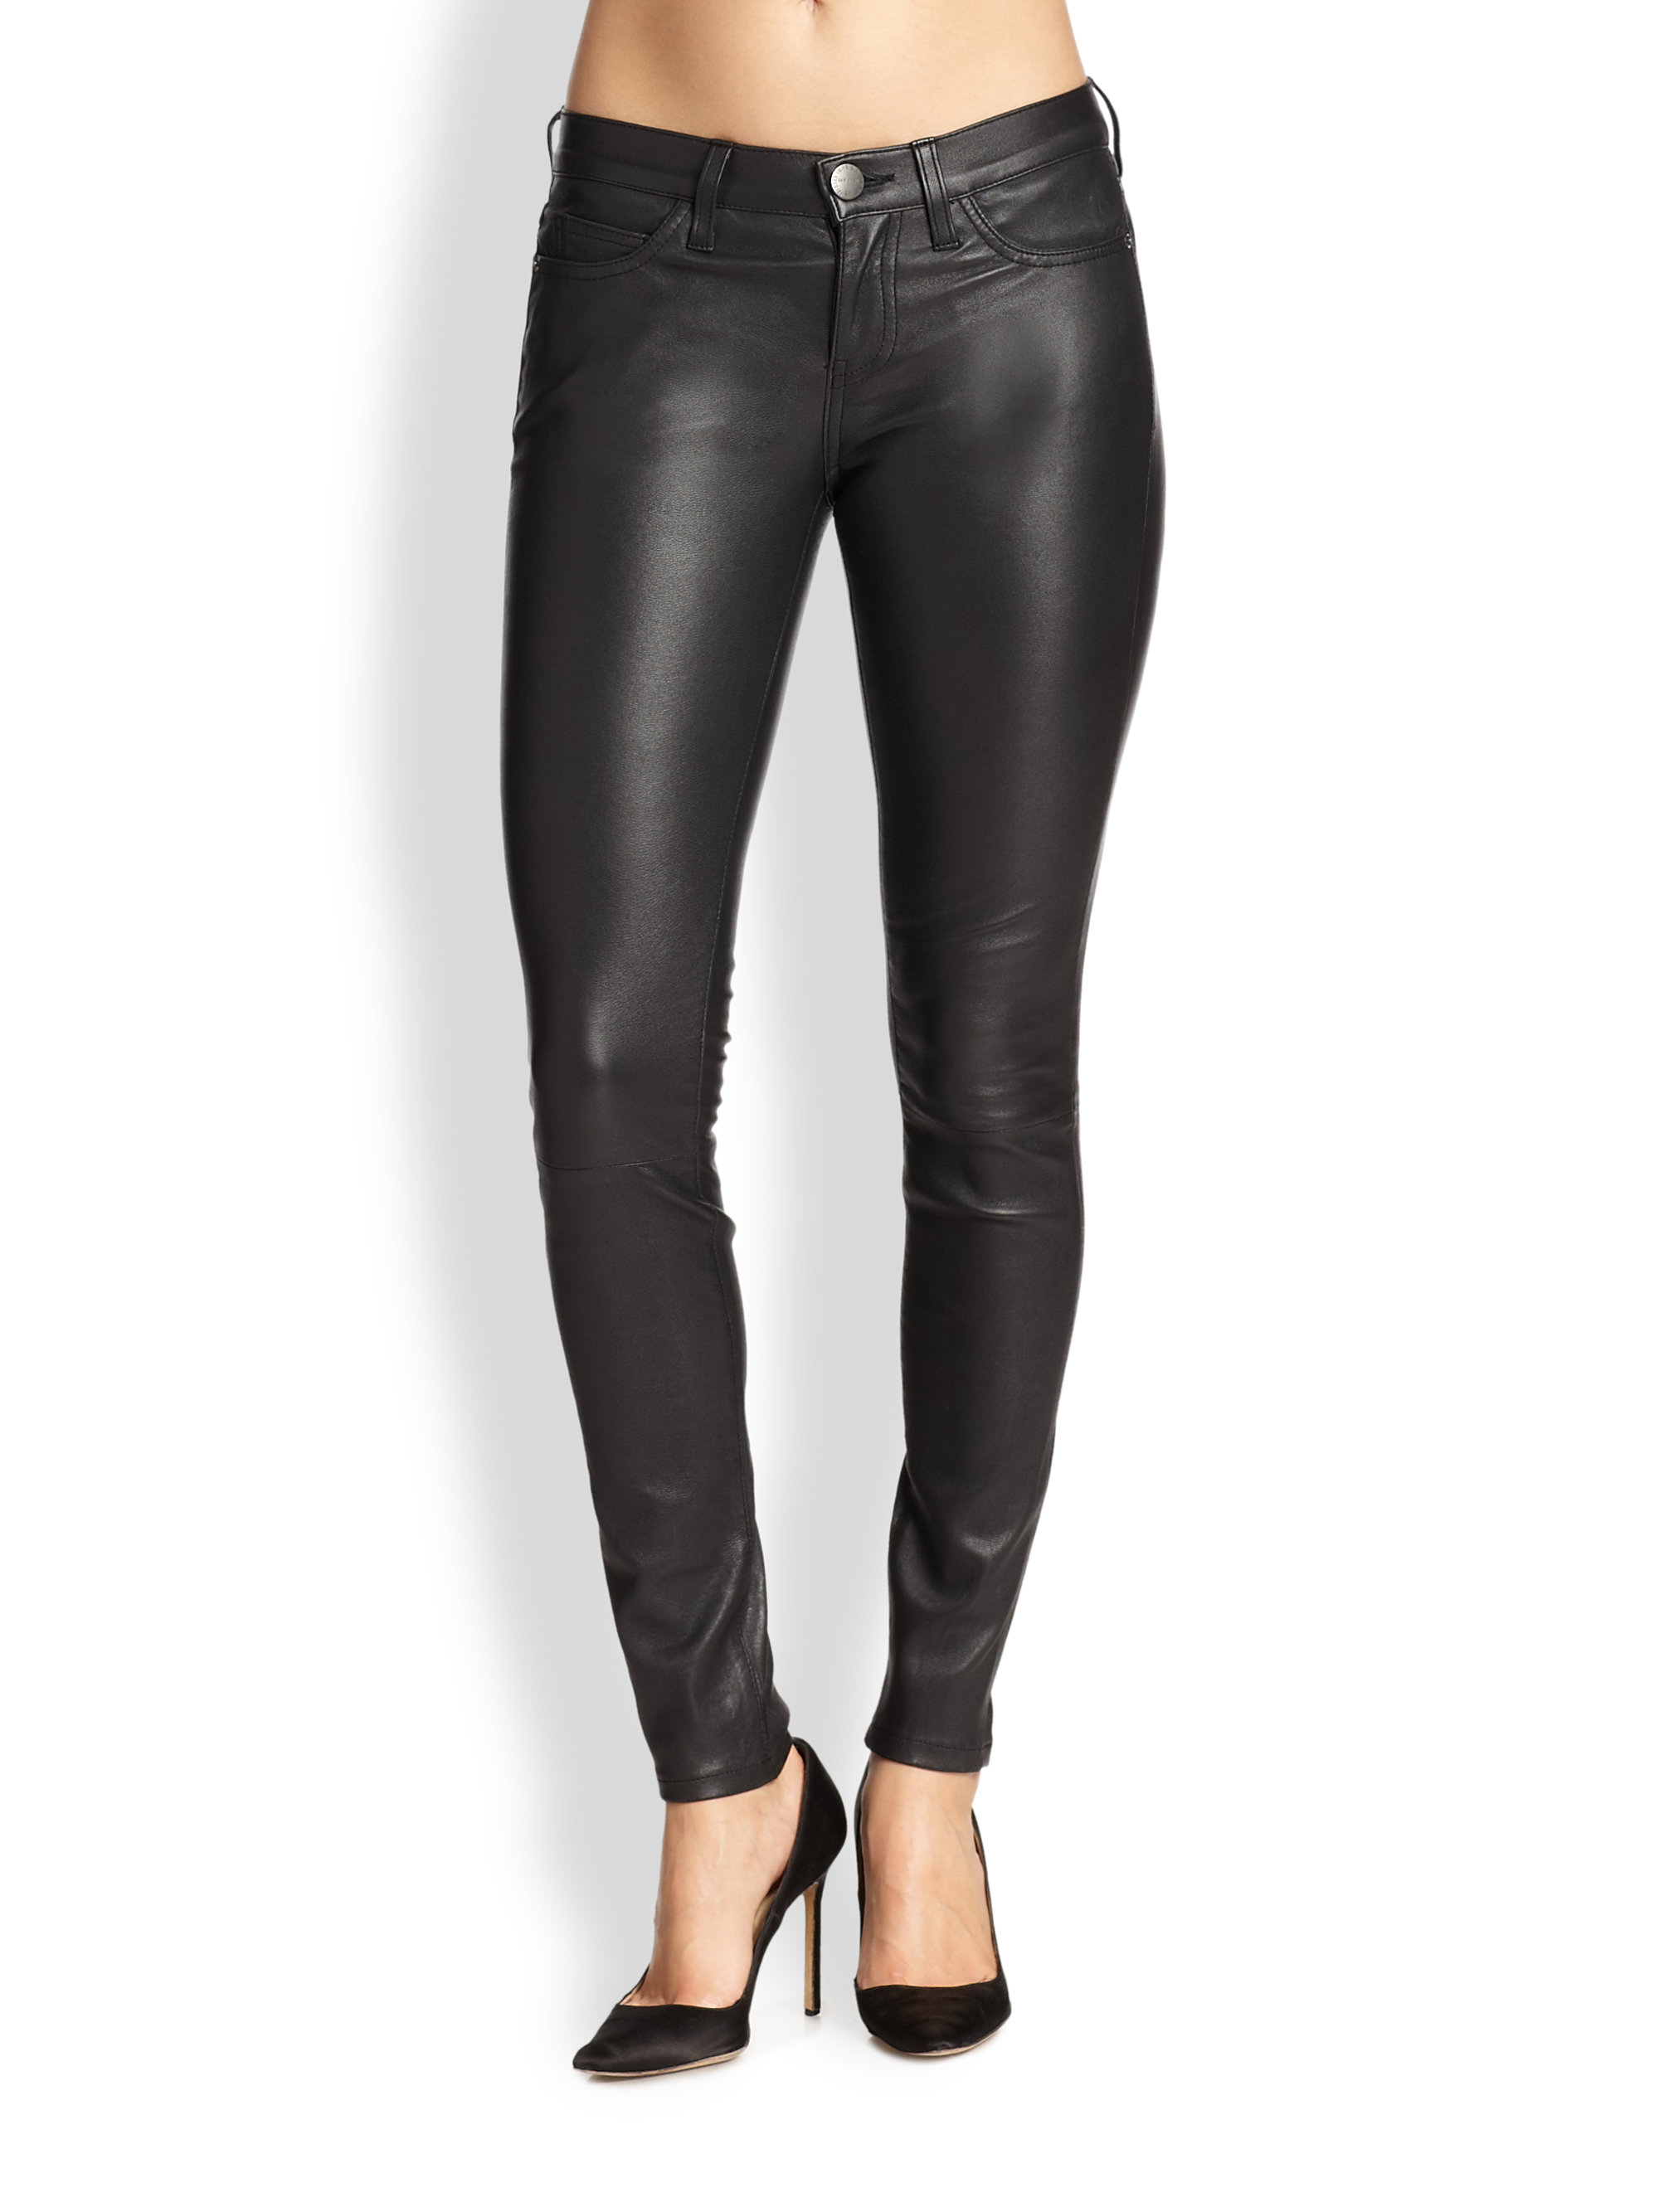 Lyst - Current/Elliott Skinny Leather Ankle Pants in Black